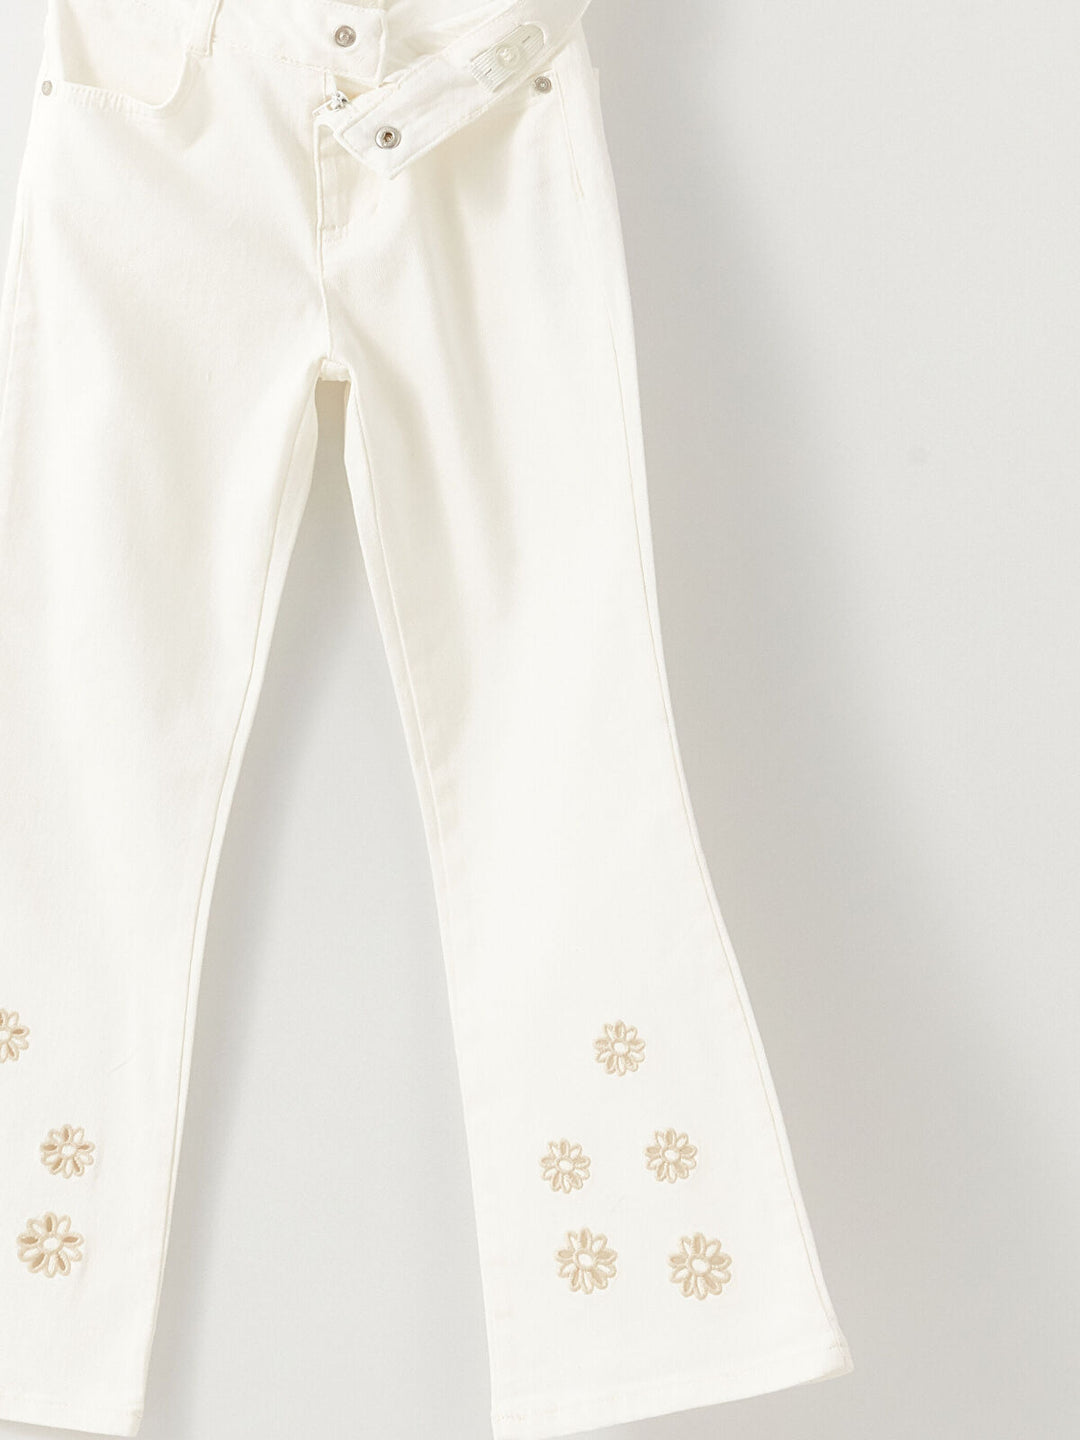 Embroidered Bell Bottom Girls' Trousers